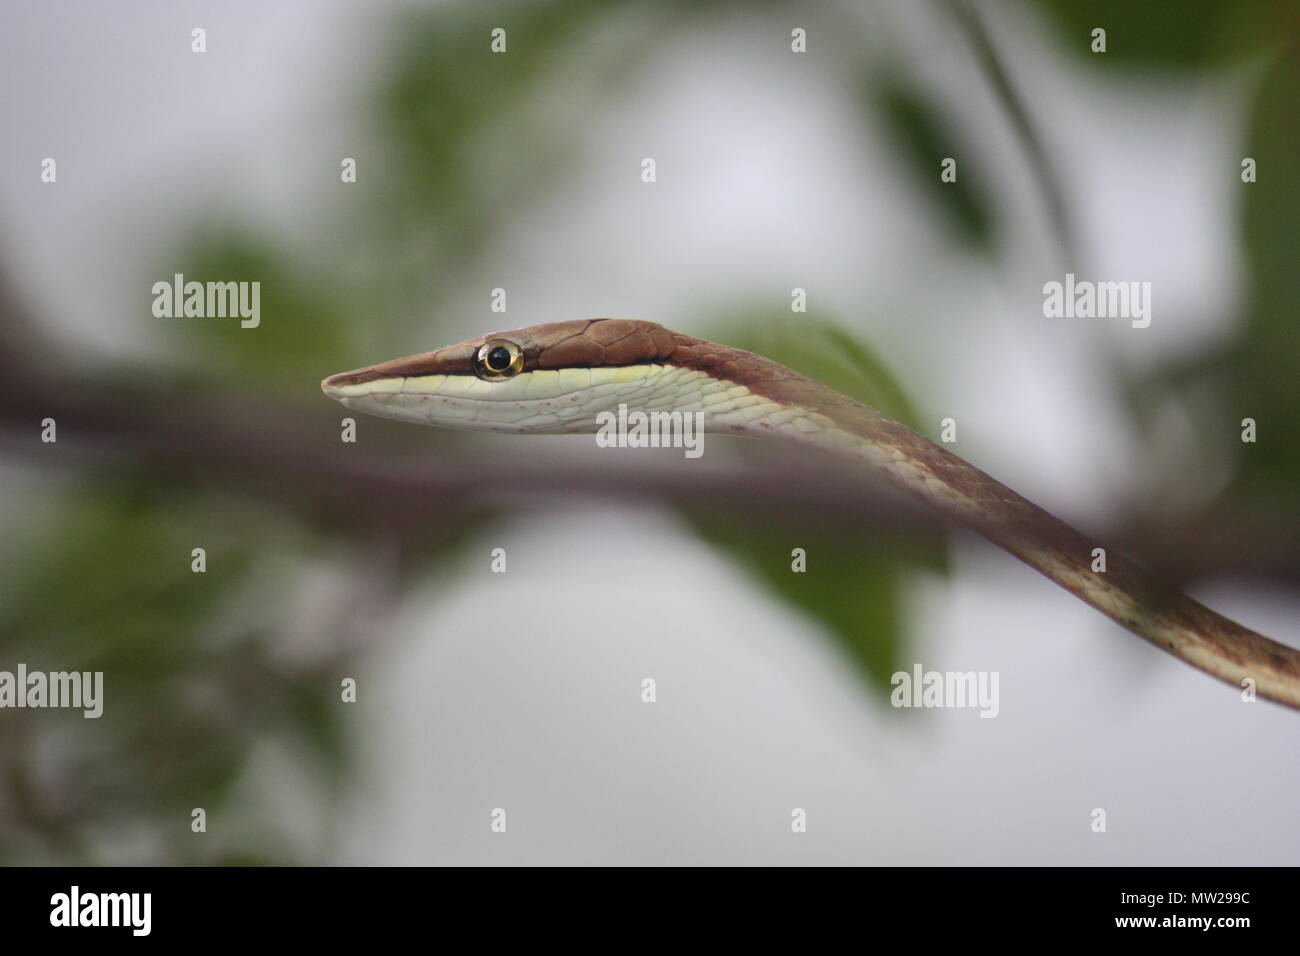 Face of a small snake in a tree Stock Photo